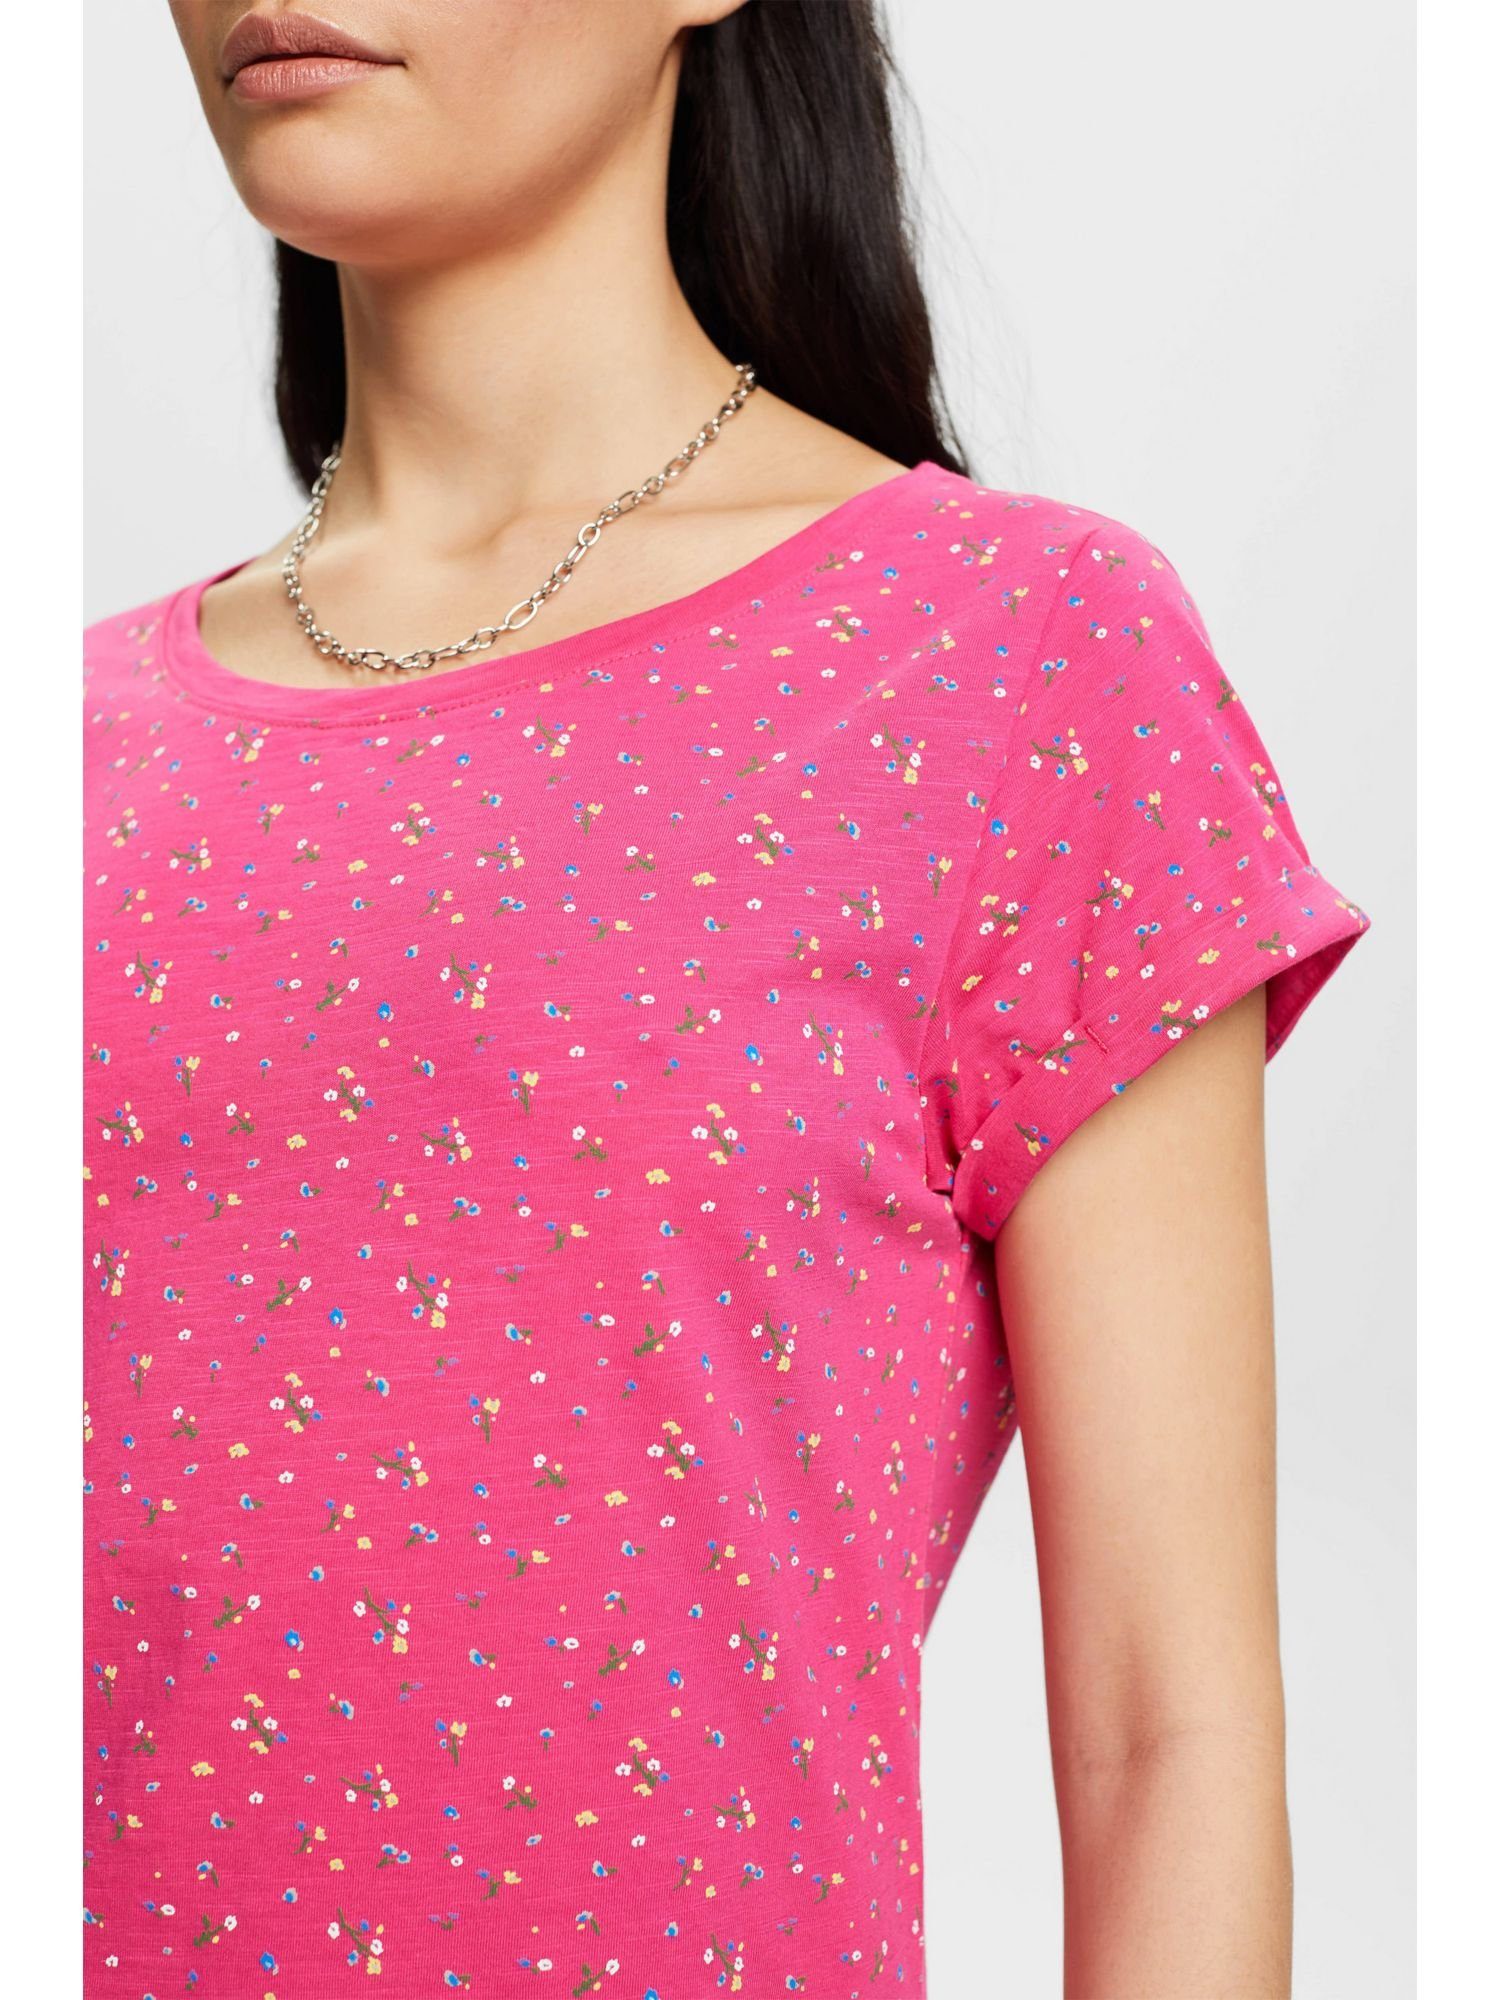 PINK T-Shirt T-Shirt Esprit by Allover-Muster mit edc (1-tlg) FUCHSIA